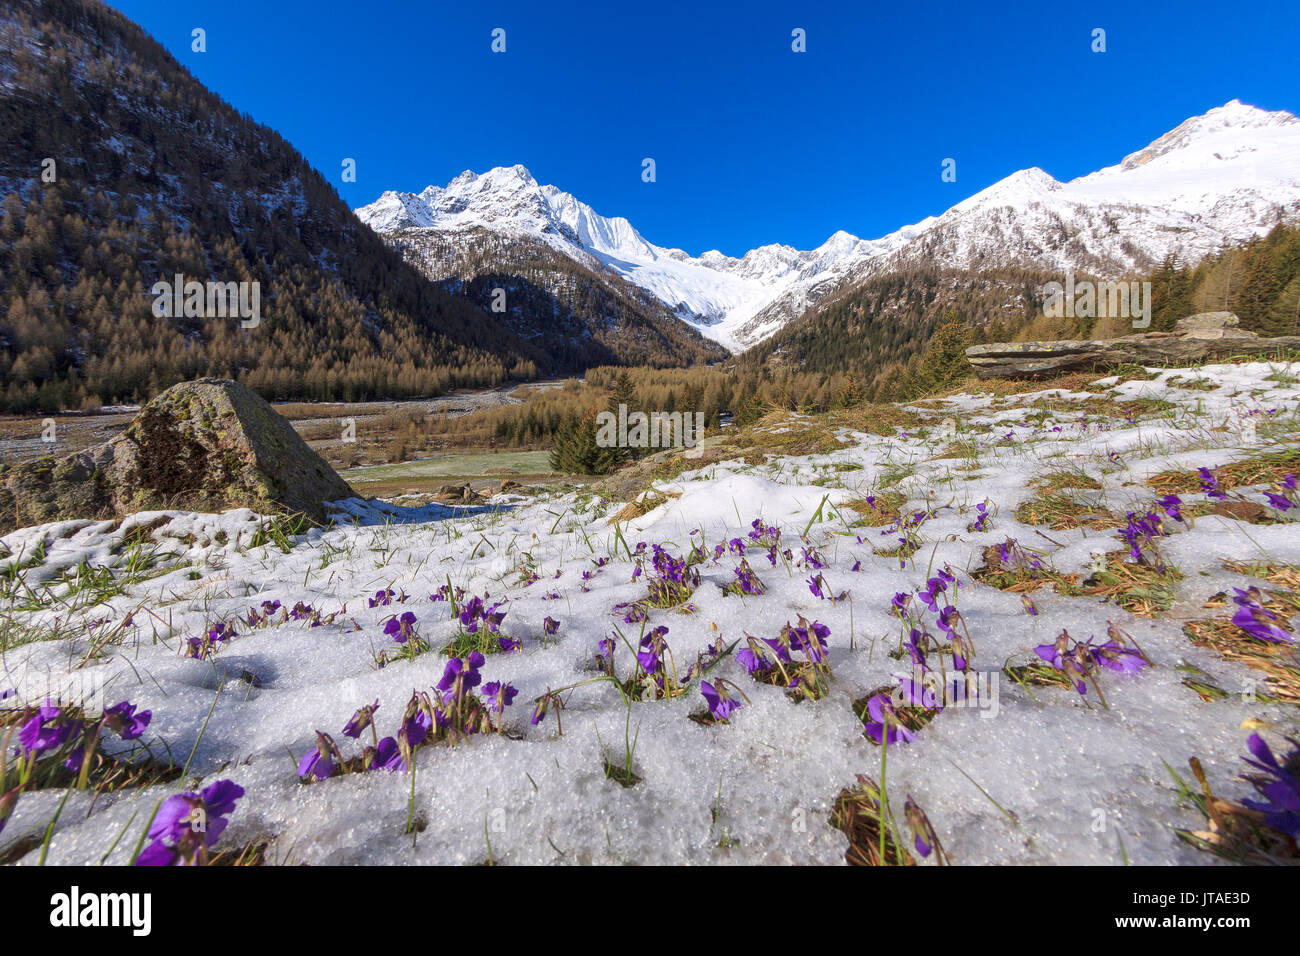 Colorful flowers on the grass covered by snow during the spring thaw, Chiareggio, Malenco Valley, Valtellina, Lombardy, Italy Stock Photo